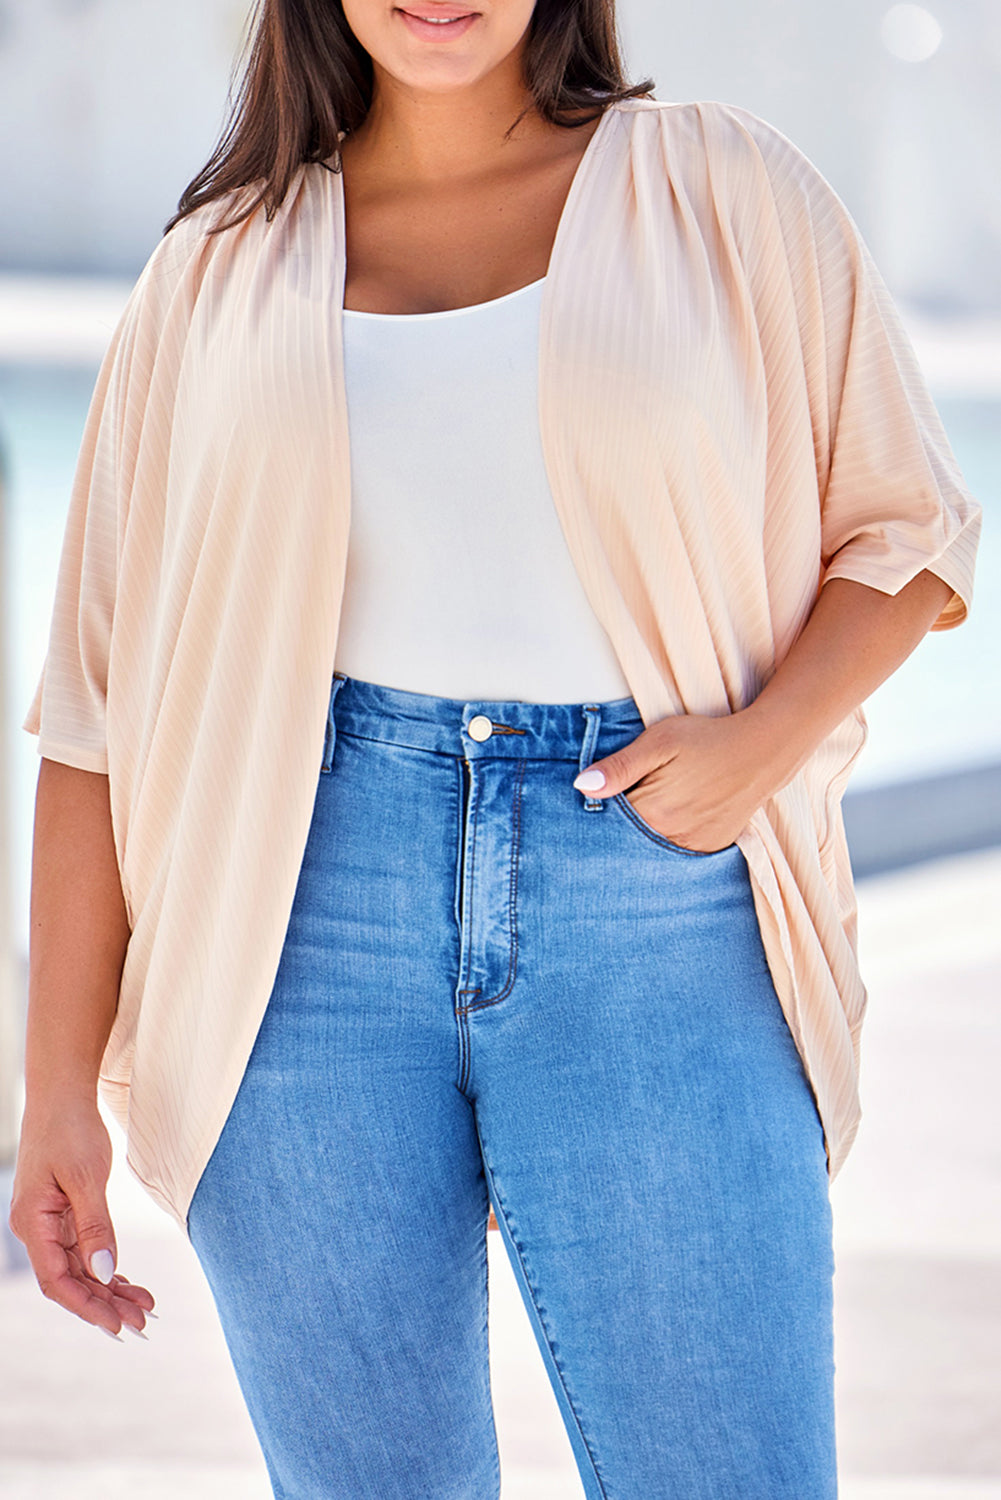 Apricot Shimmer Ribbed Texture Plus Size Cardigan